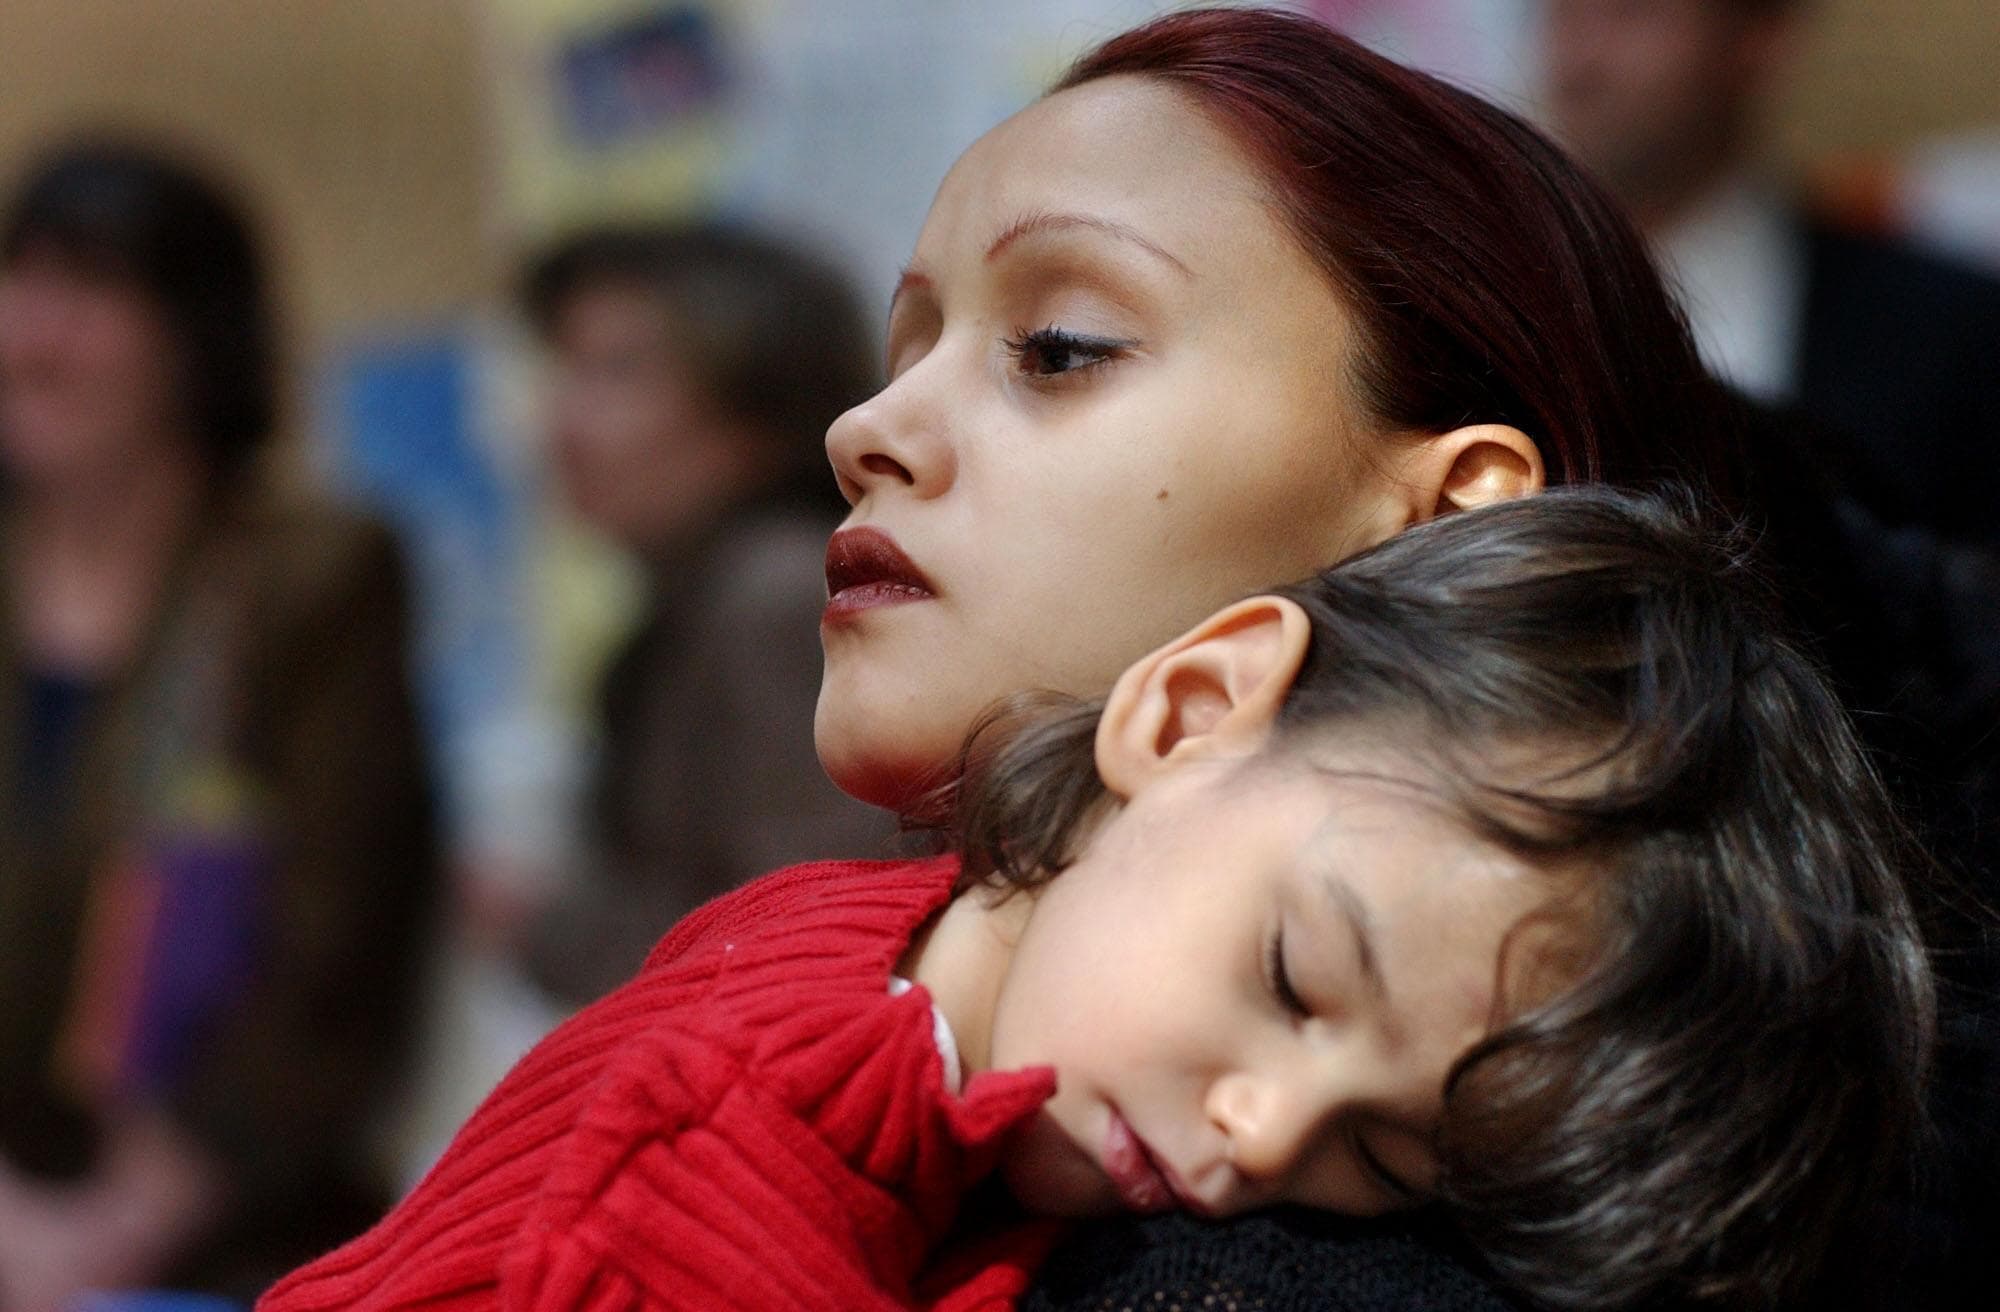 A teen mother and her son in Boston, MA in March, 2003. (AP Photo/Patricia McDonnell)